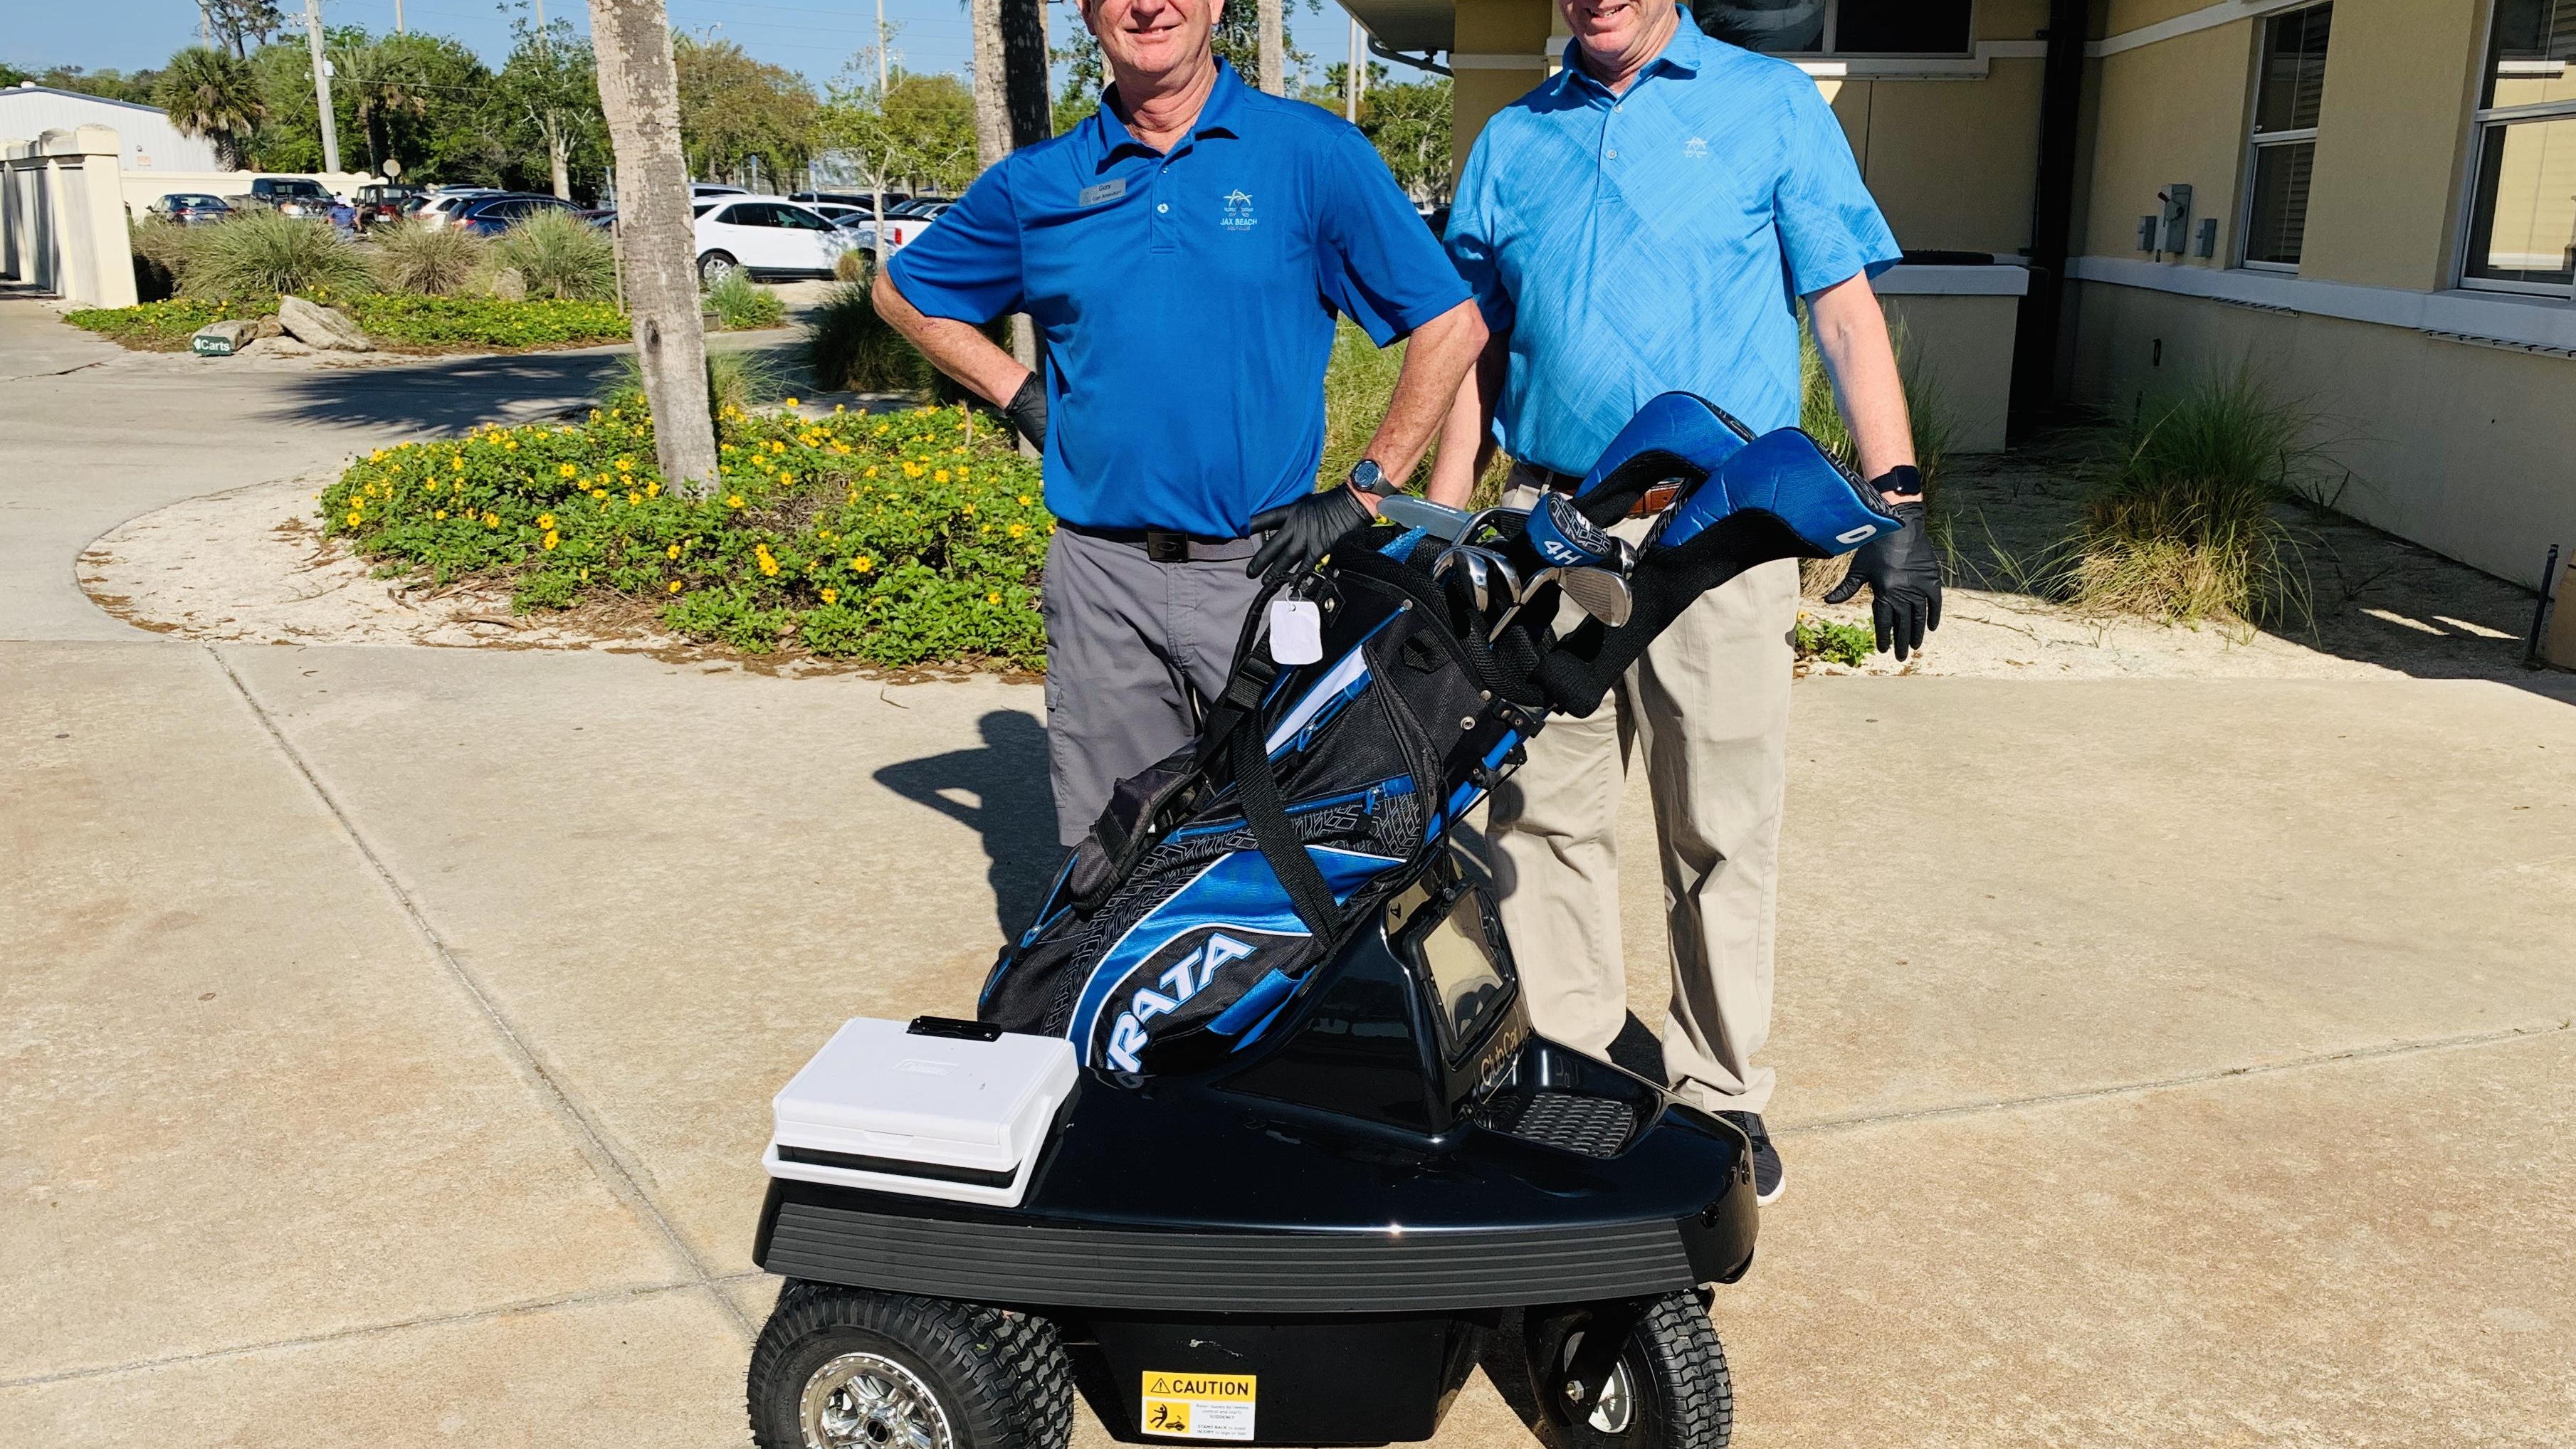 Tempo Walk' may encourage more golfers to forego golf carts and get exercise